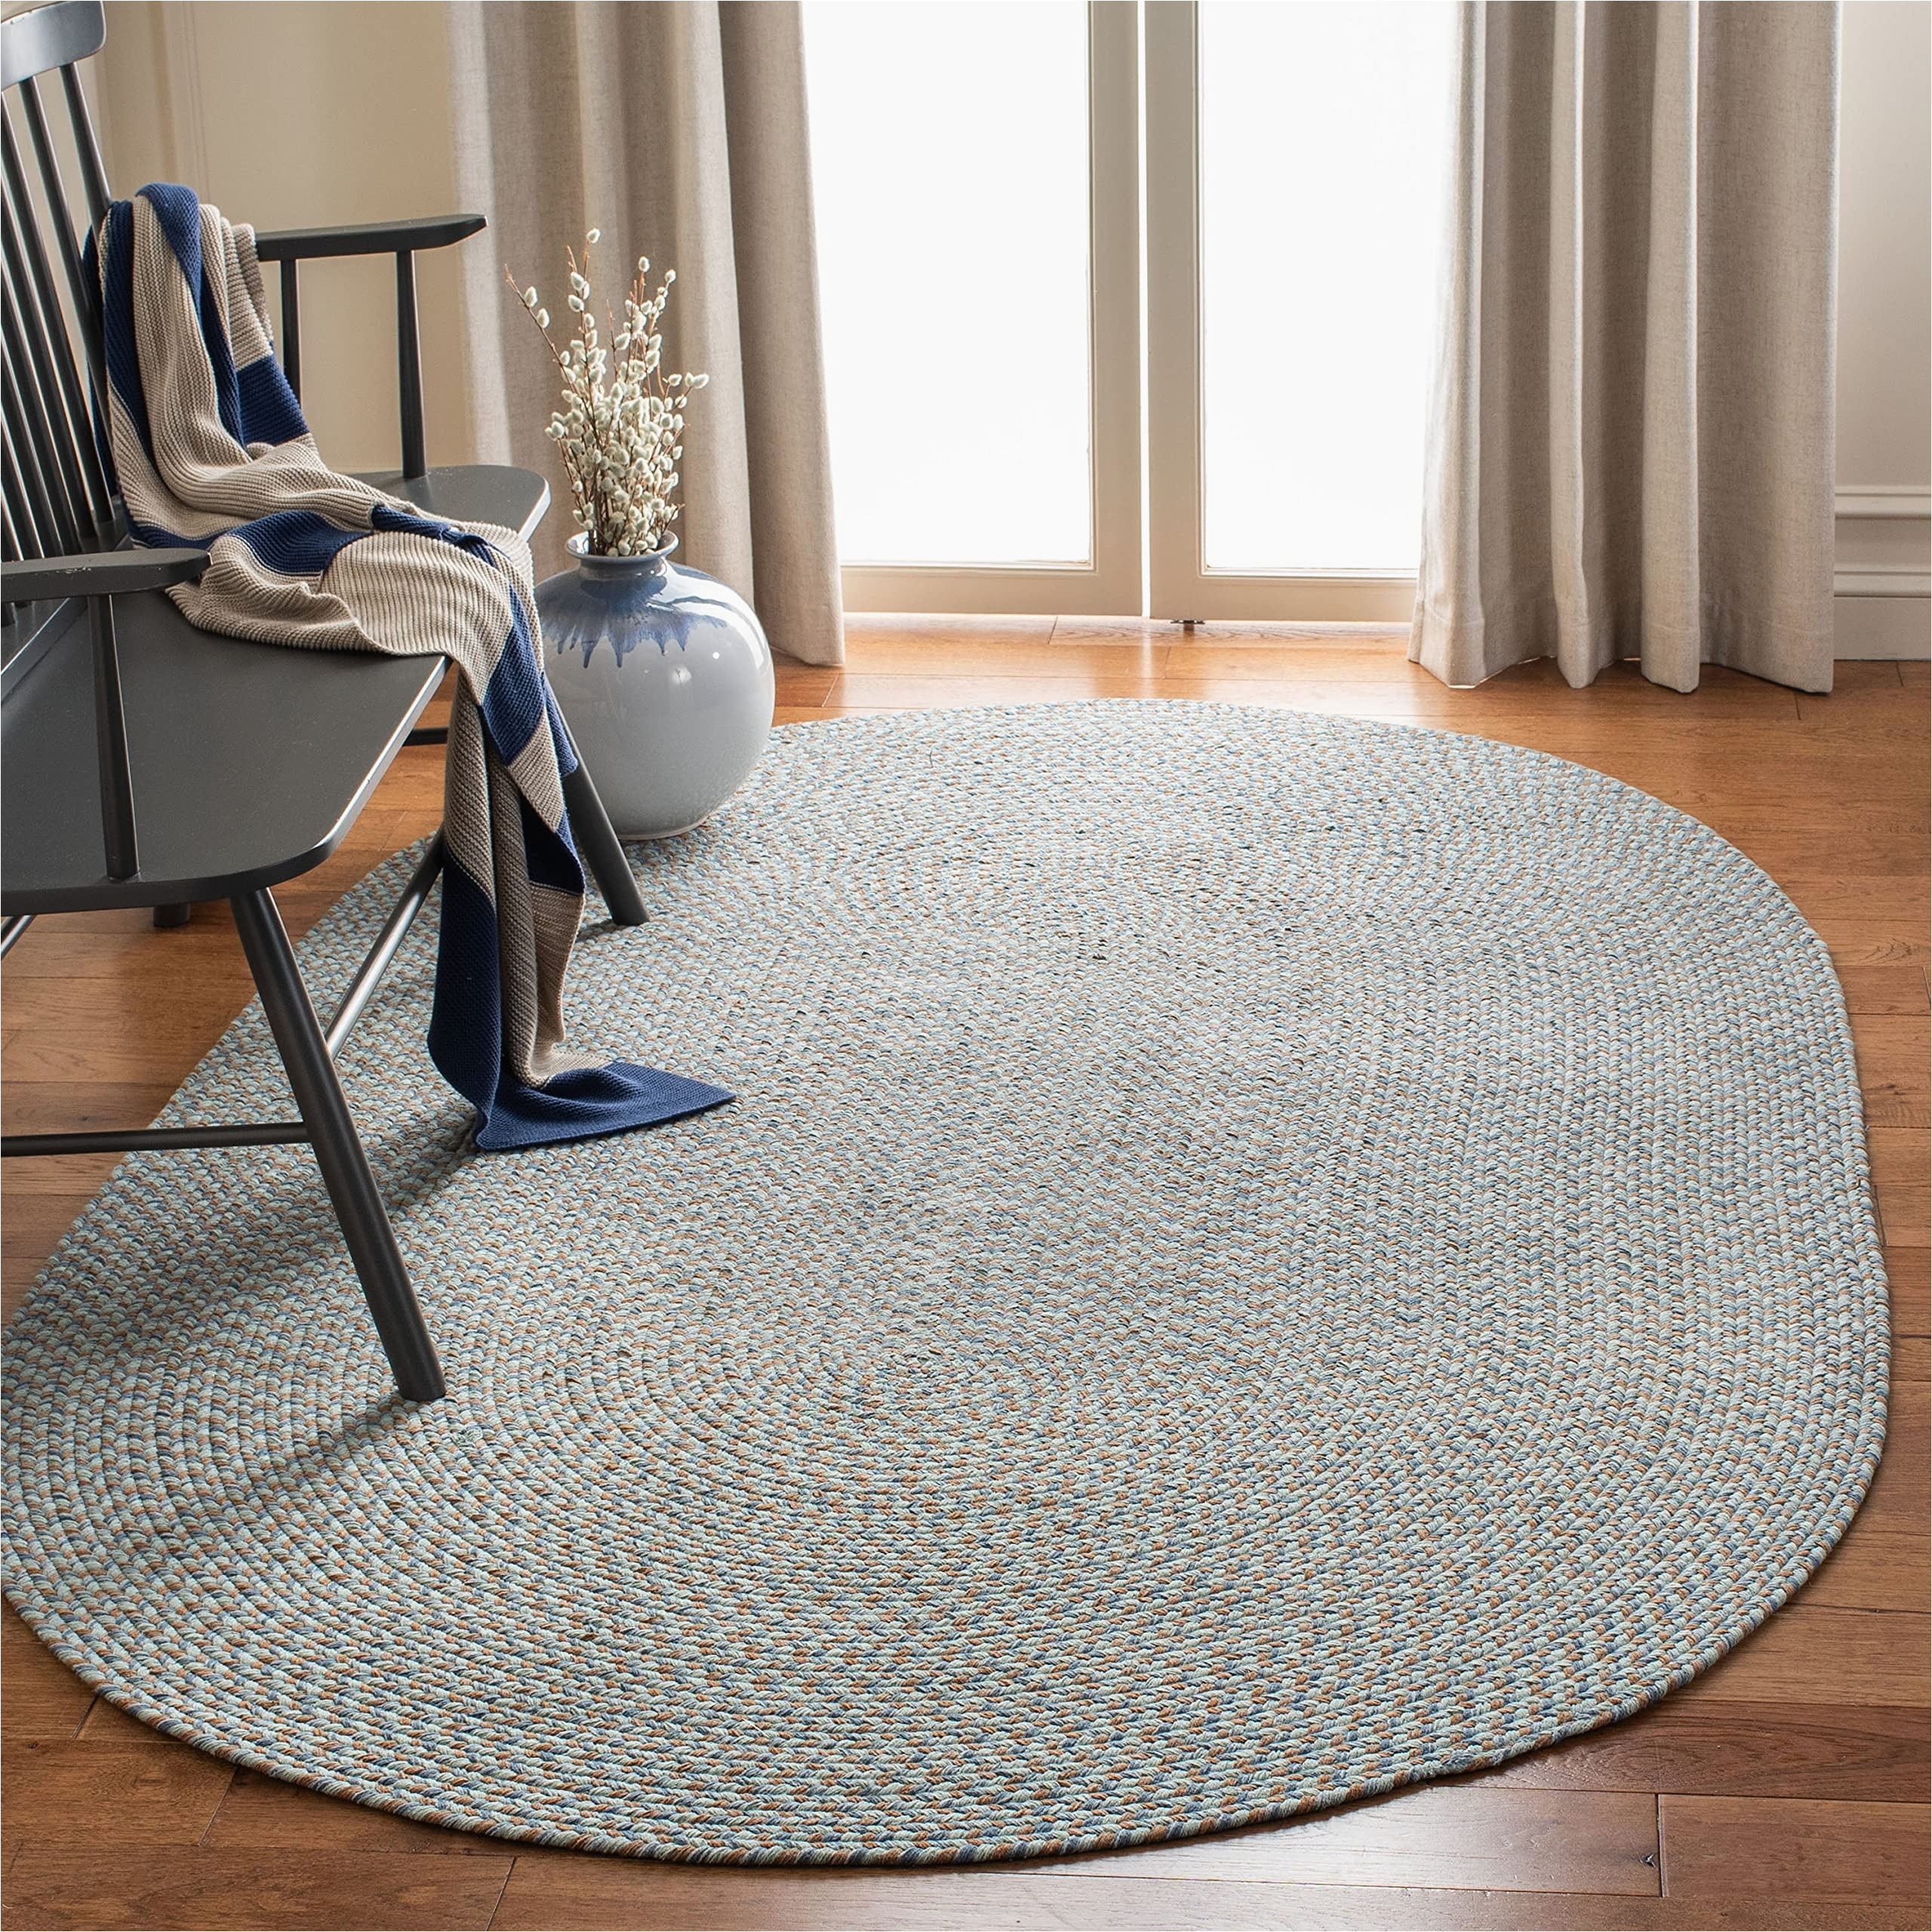 Oval area Rugs 6 X 8 Safavieh Braided Collection Brd170a Handmade Country Cottage Reversible Cotton area Rug, 8′ X 10′ Oval, Multi